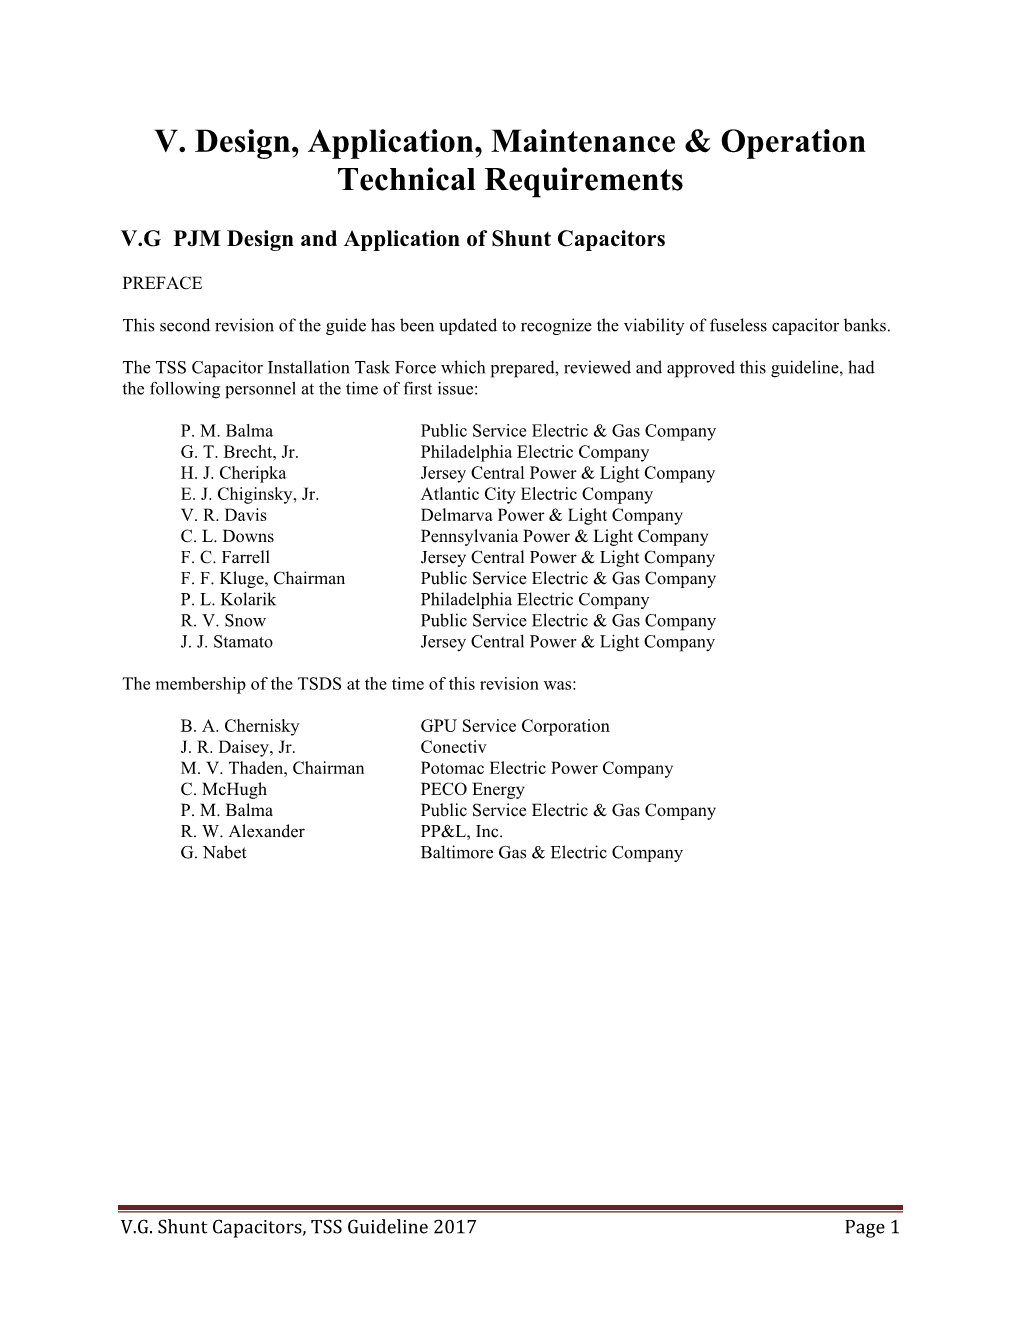 V. Design, Application, Maintenance & Operation Technical Requirements